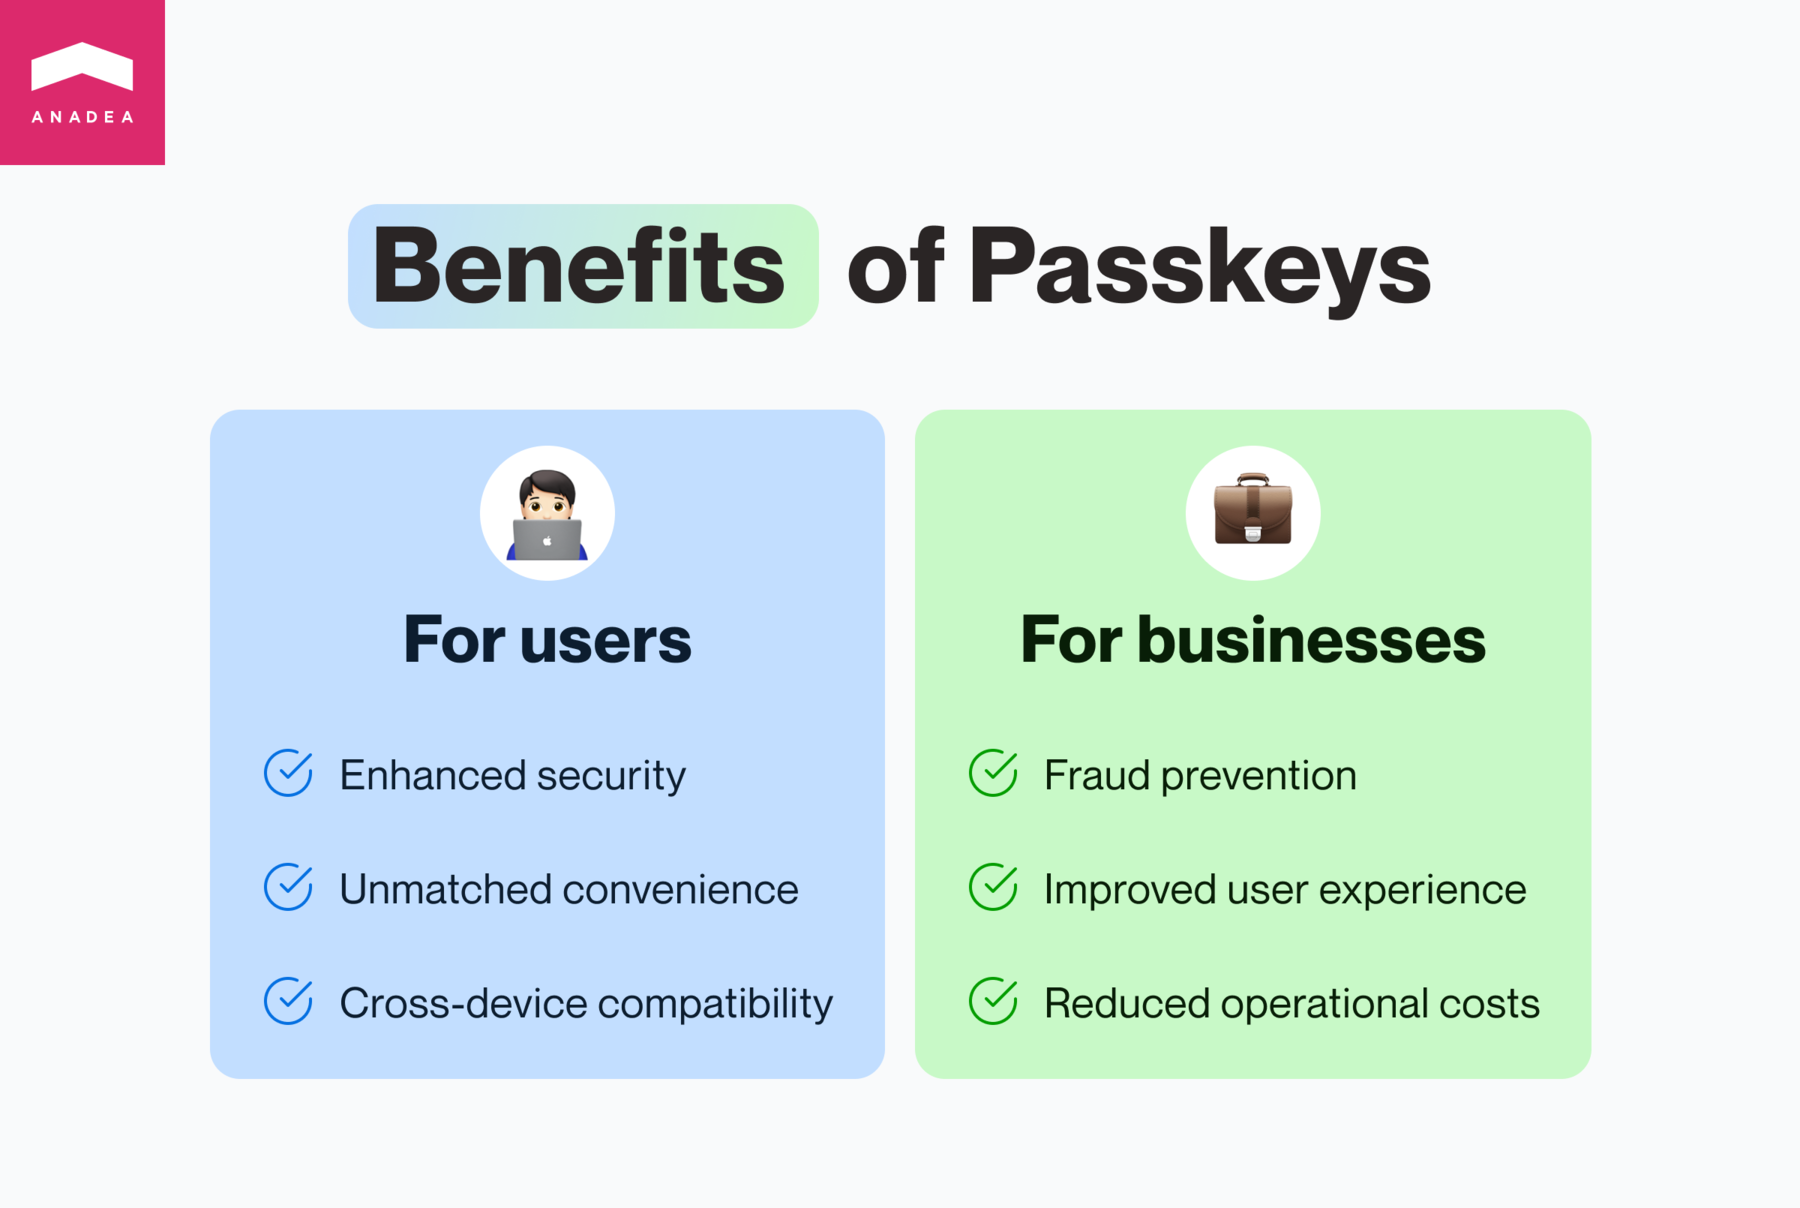 Benefits of passkey for business and users